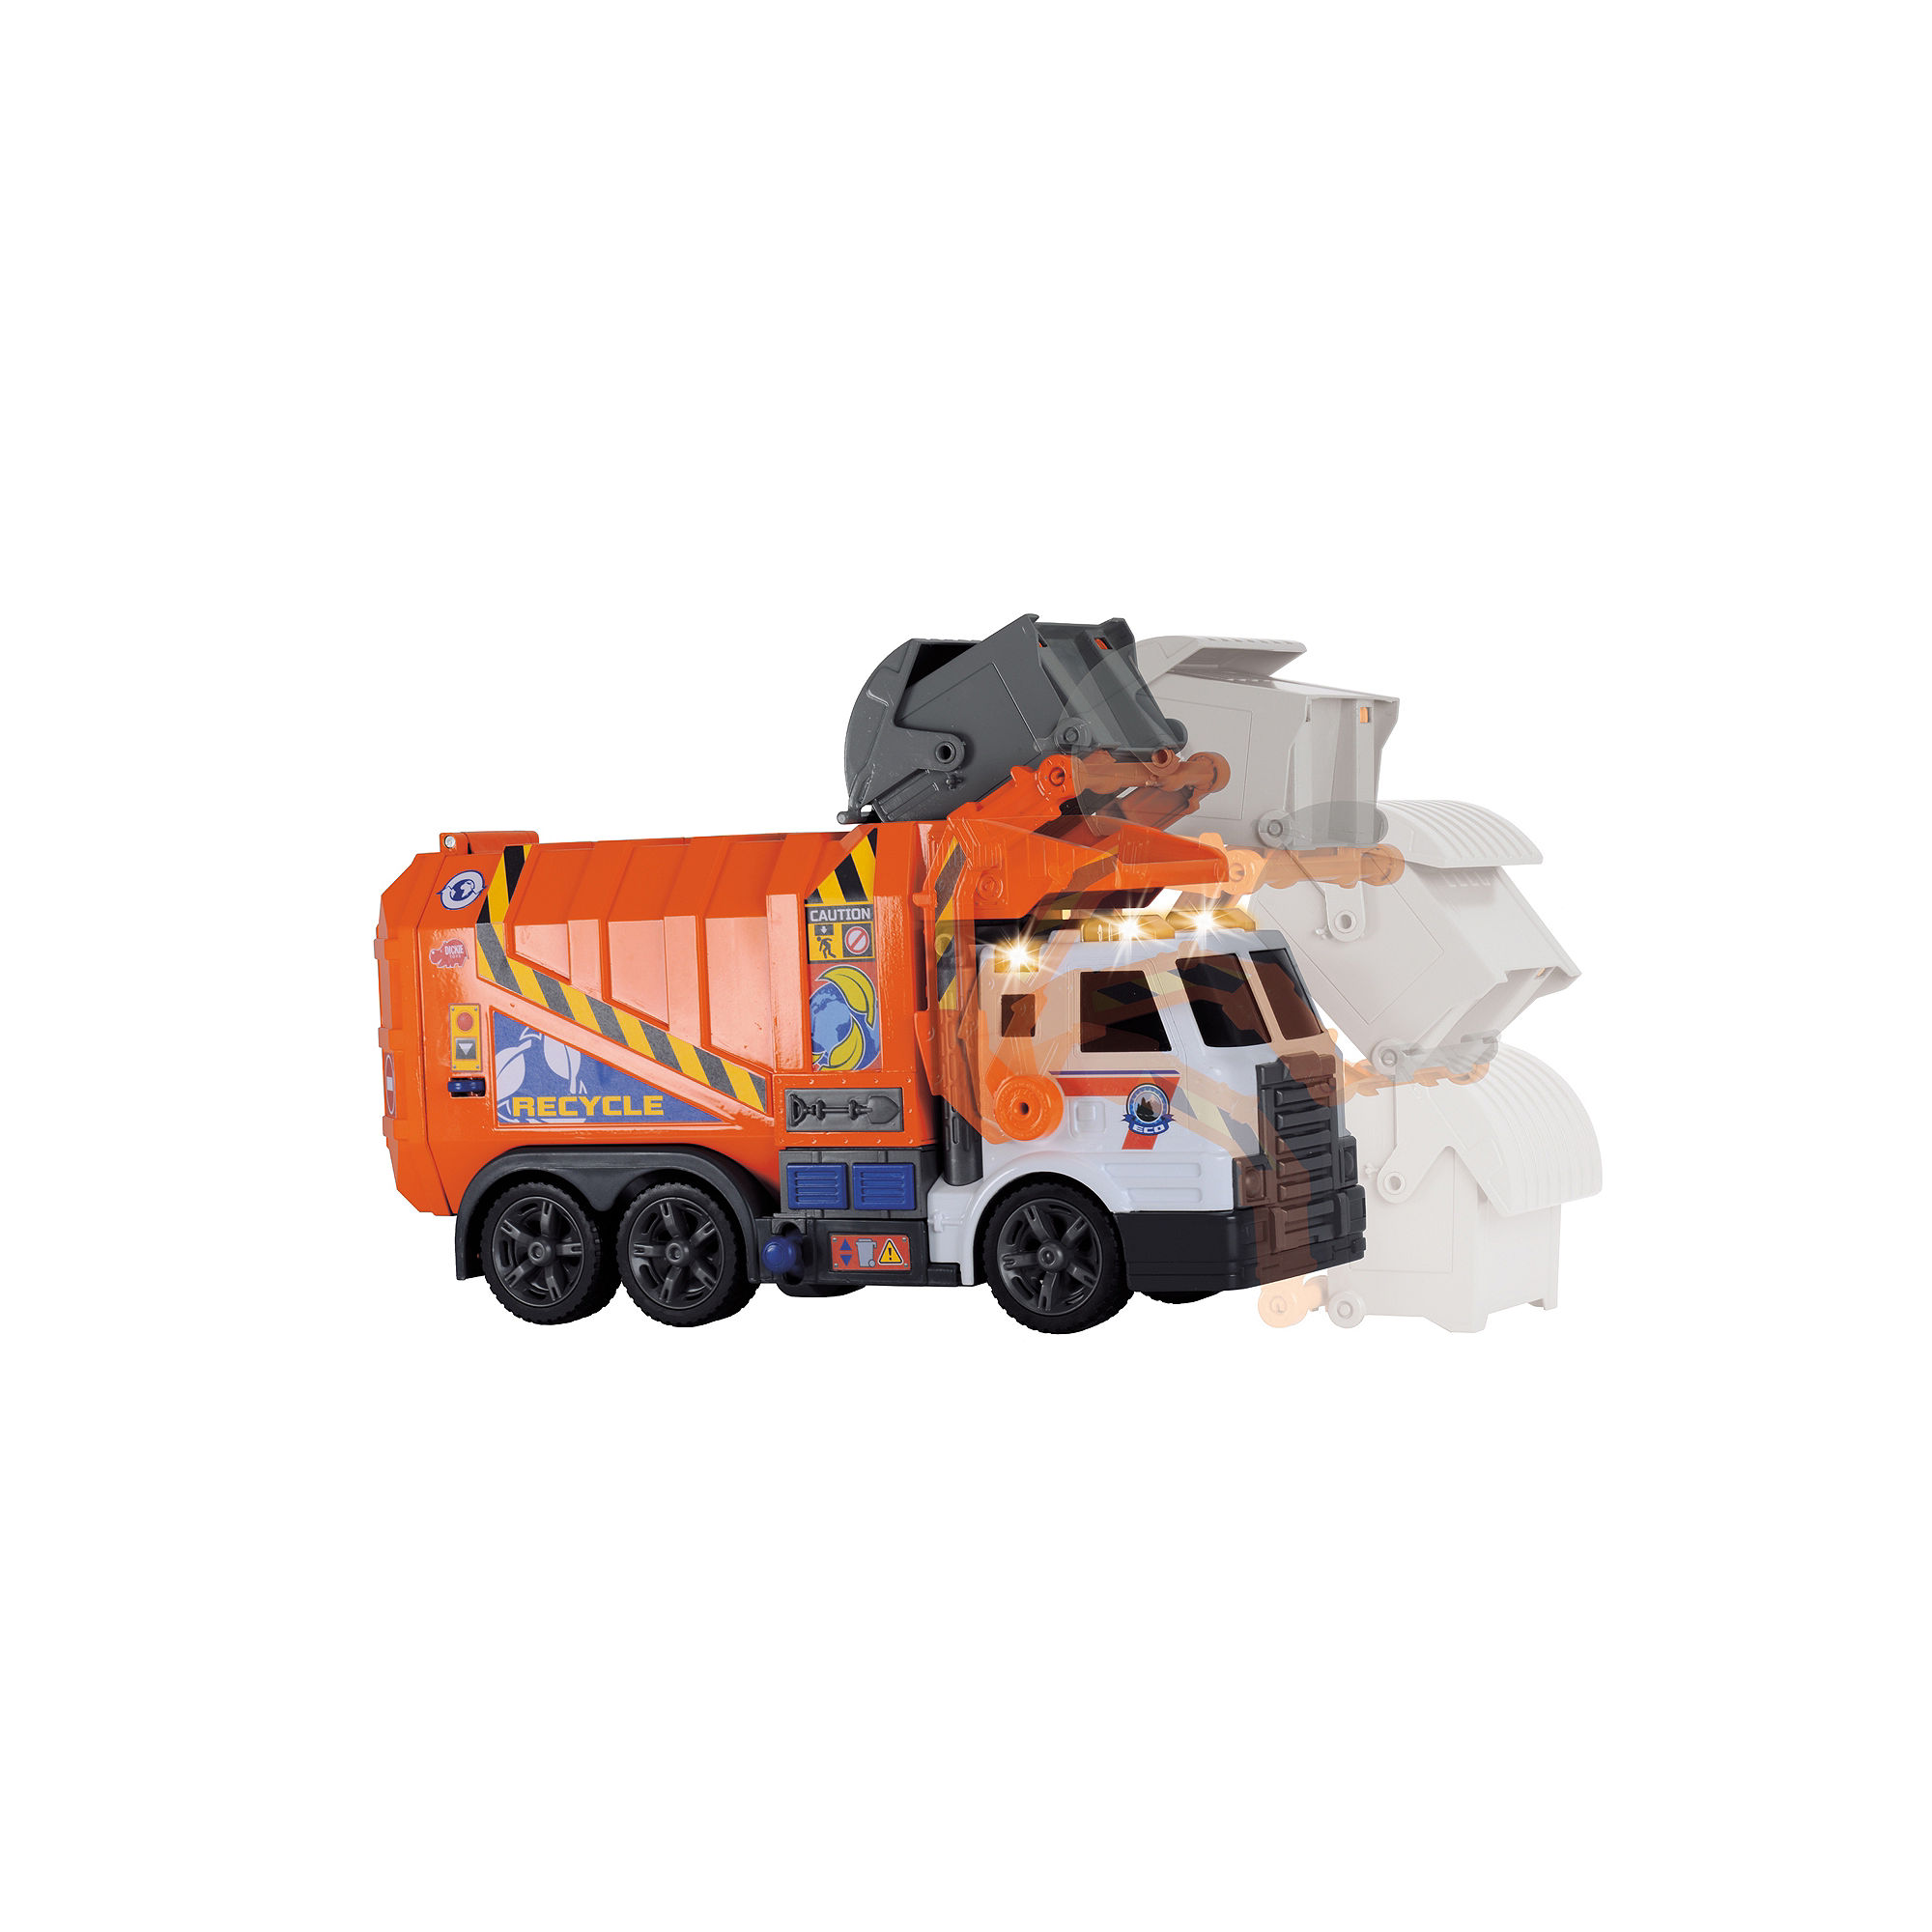 Dickie Toys - Action Series 26 Inch Garbage Truck - image 4 of 7